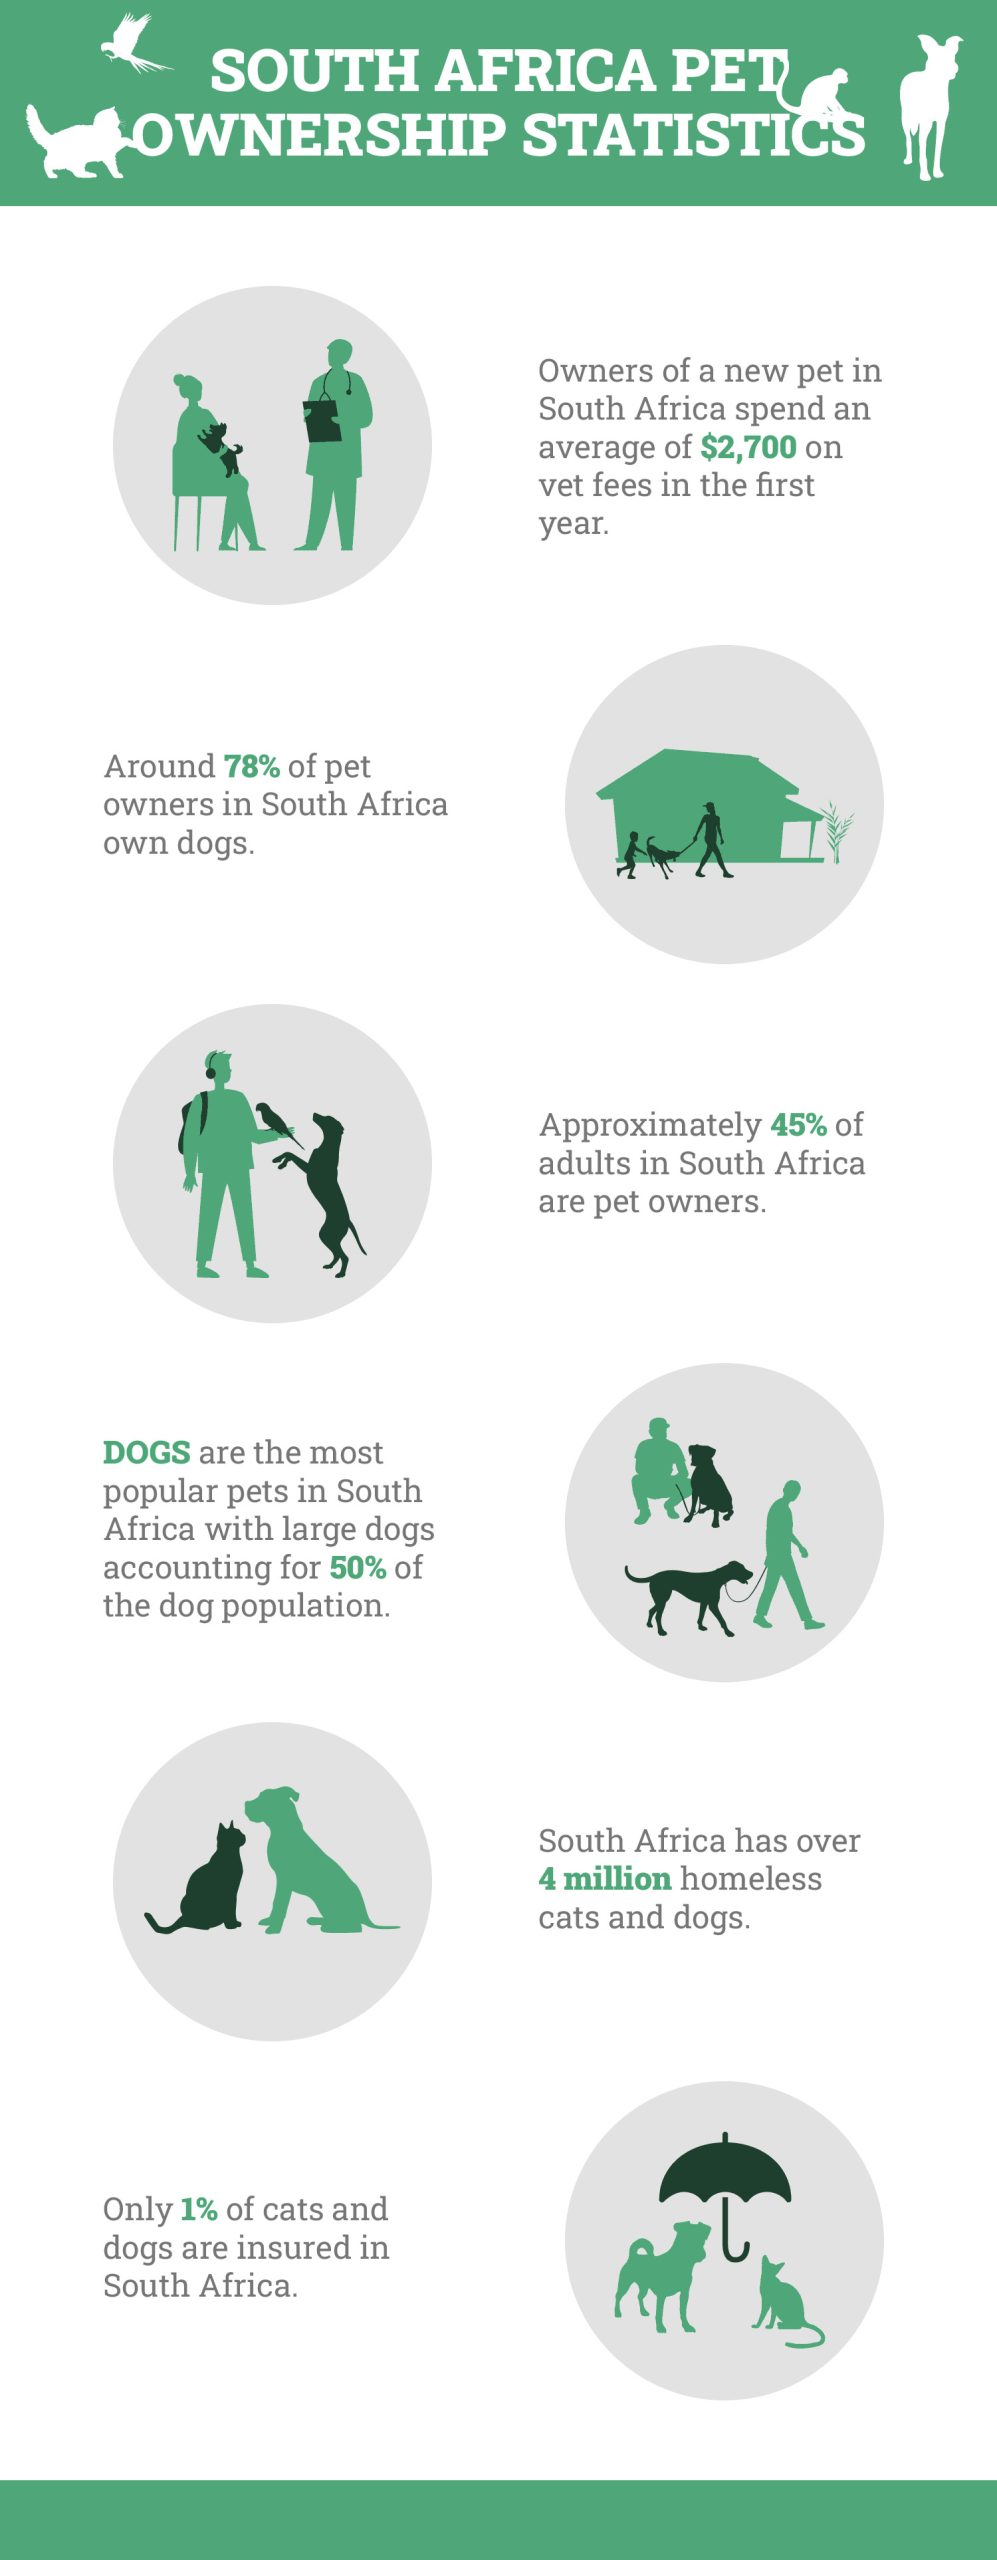 South Africa Pet Ownership Statistics